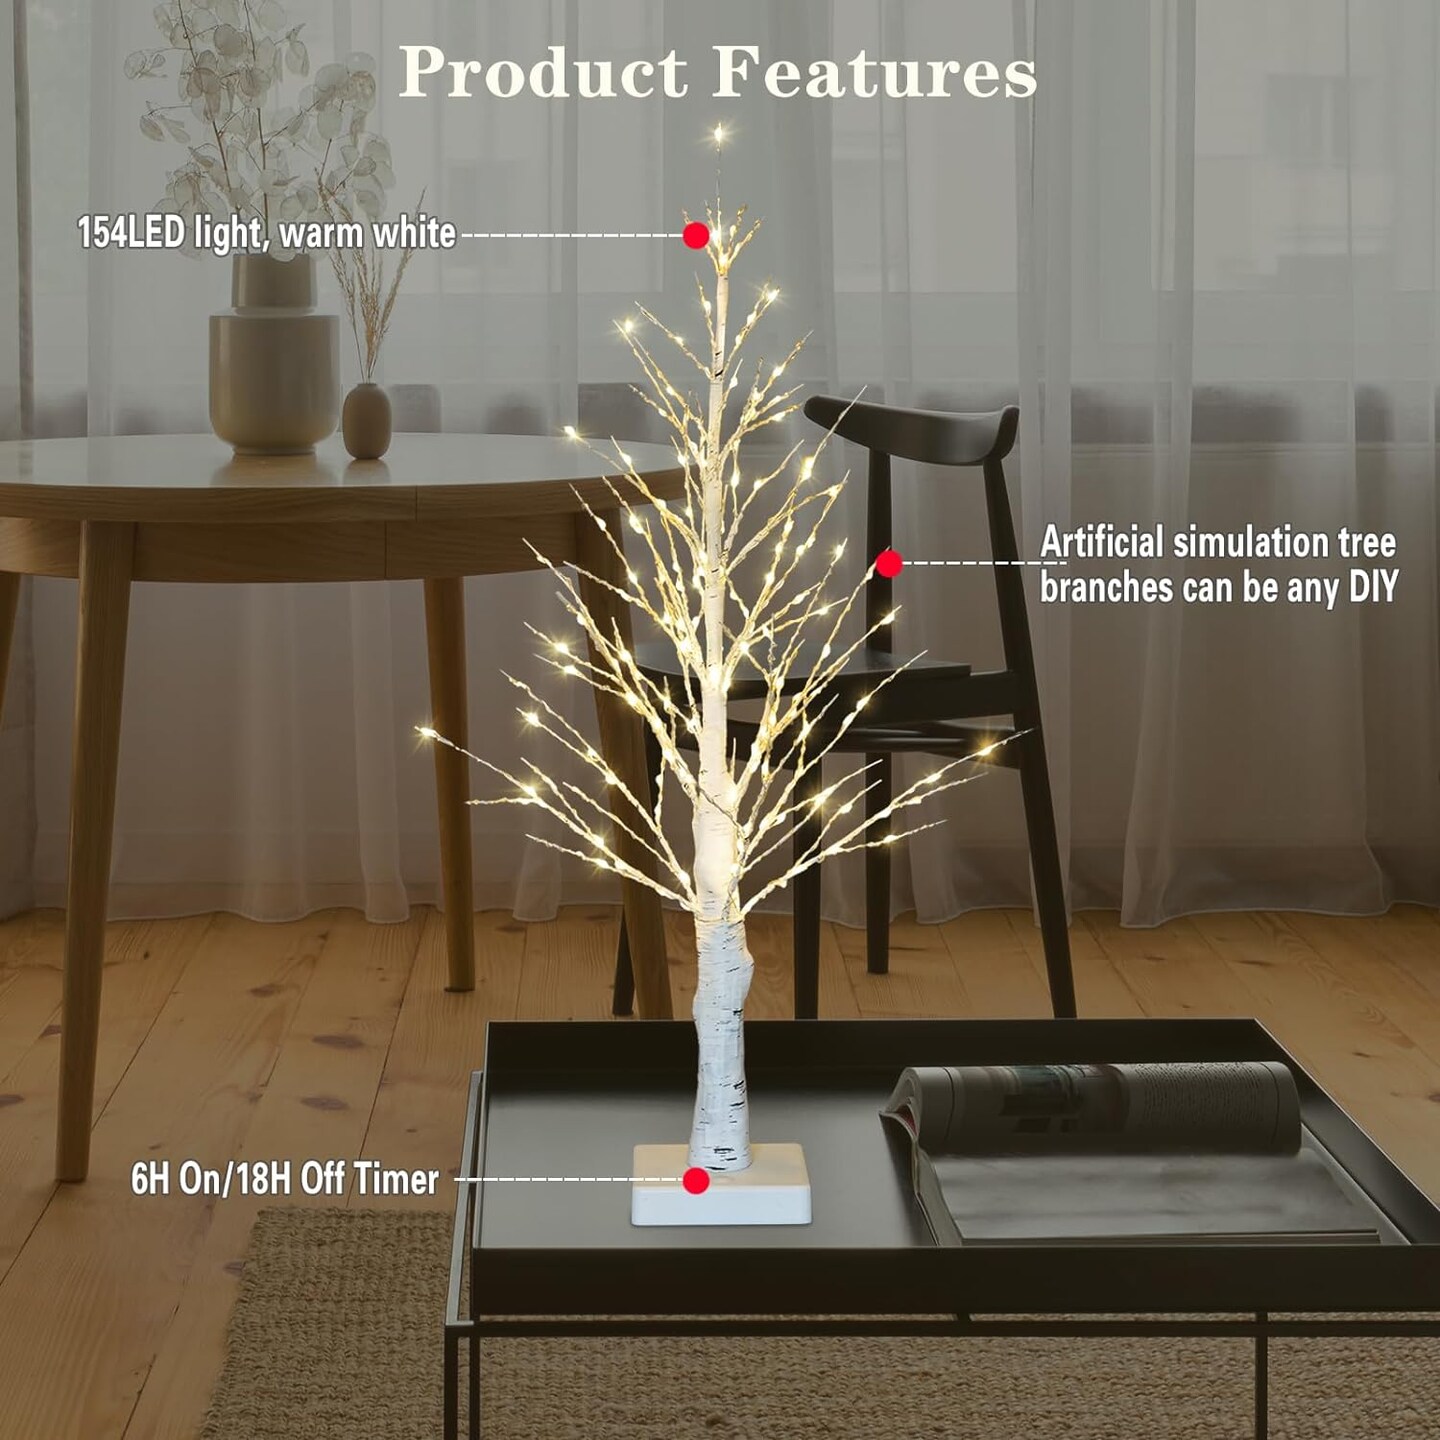 Home Decorations: Lighted Birch Tree Indoor, 1.96FT Simulation Tree Light, Battery Operated and USB Power, Lighted Desktop Birch Bonsai Tree Led Lights Festival Wedding Table Top Decorations,Timer.